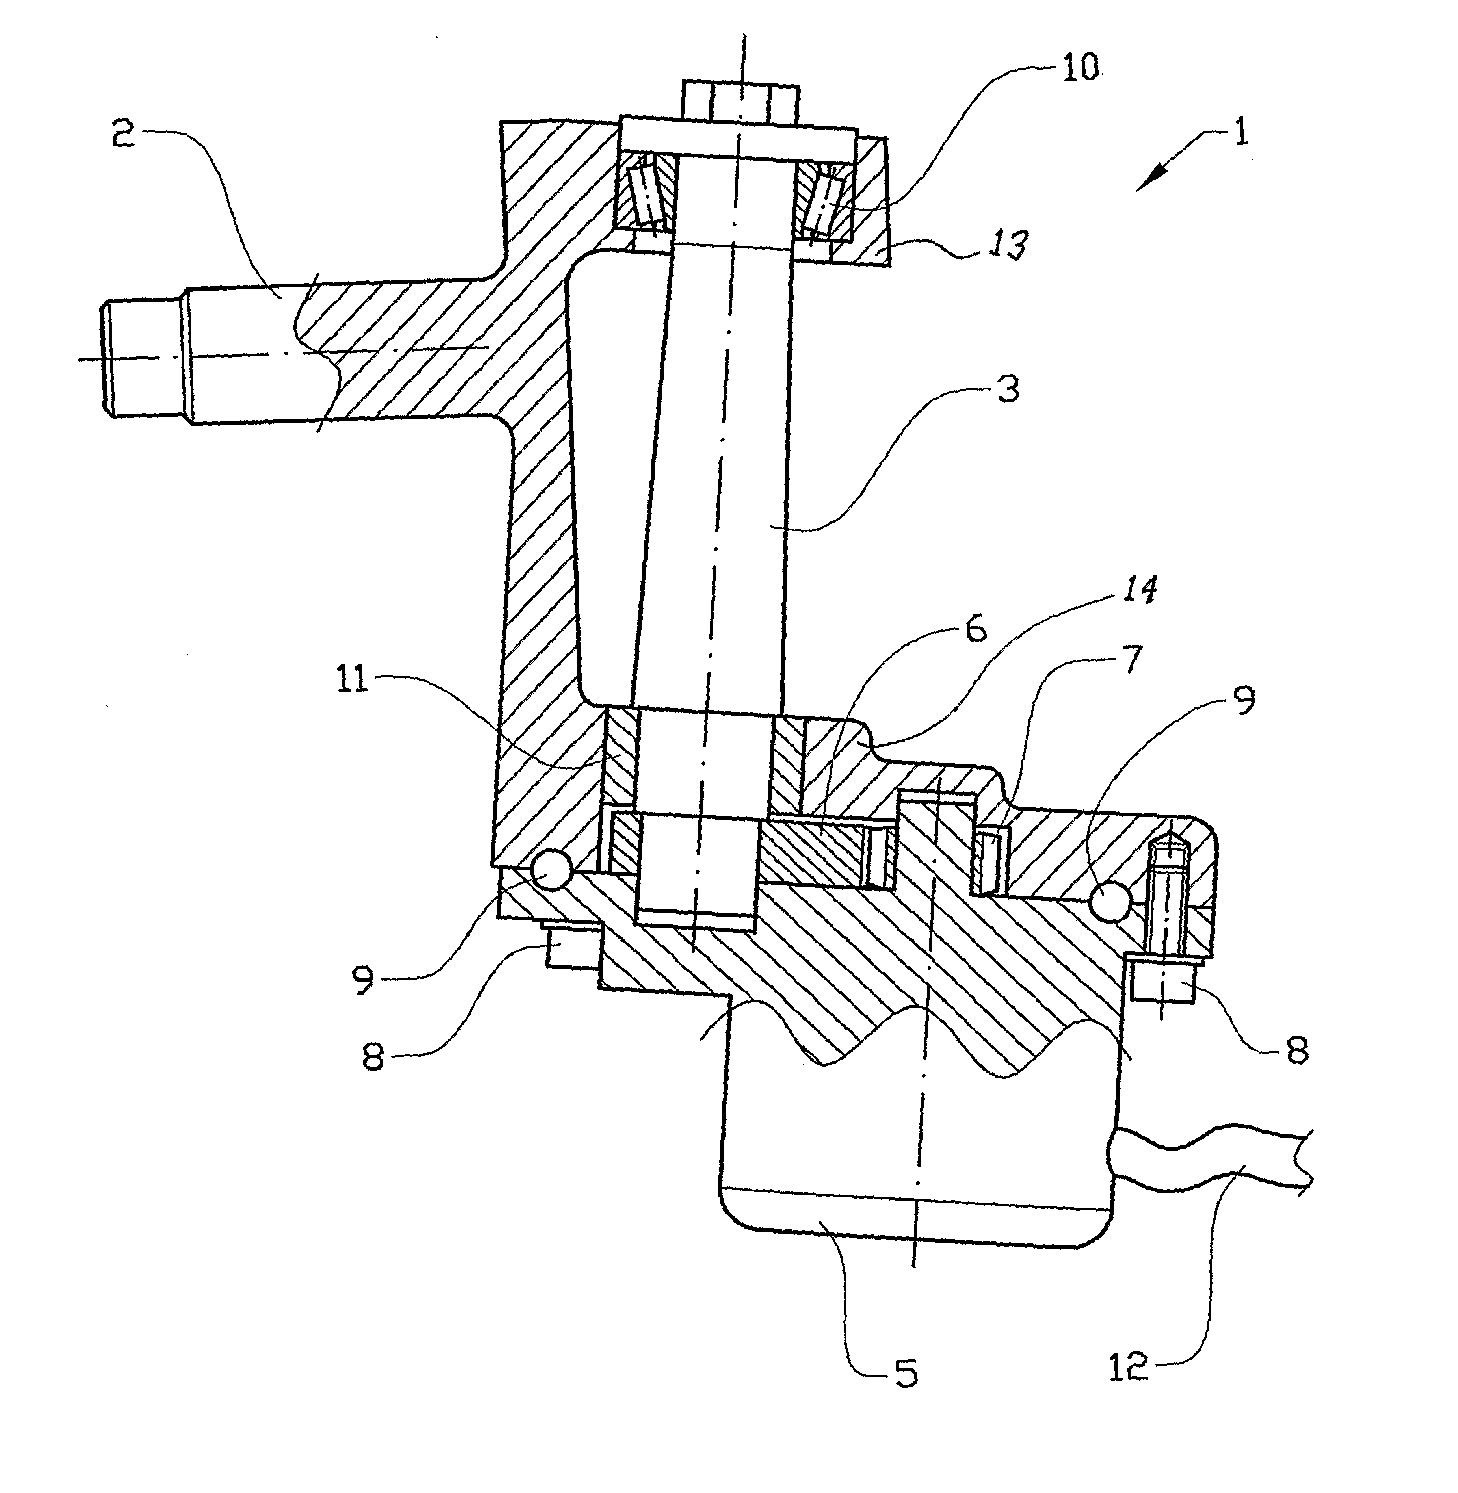 Vehicle, method and steering system for vehicle